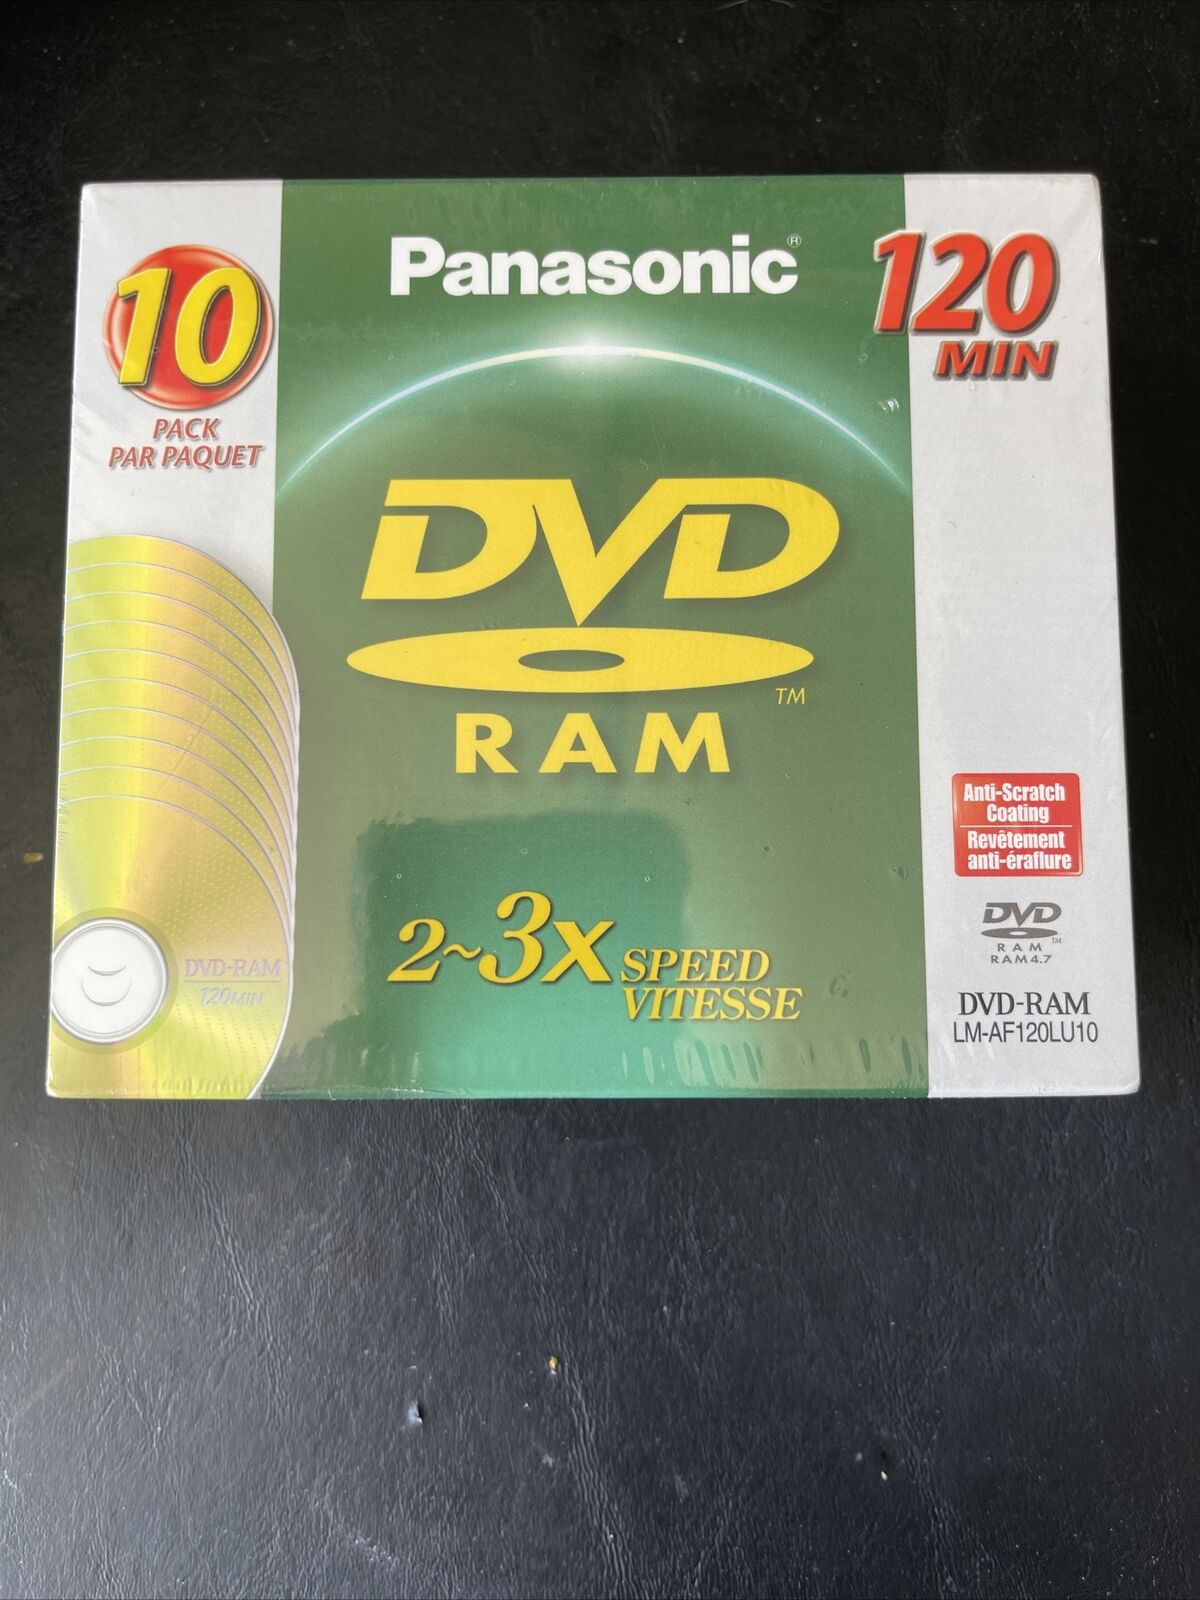 NEW 10 X Panasonic 120 Minutes DVD-RAM 2 - 3X Speed Recordable Discs Made in USA